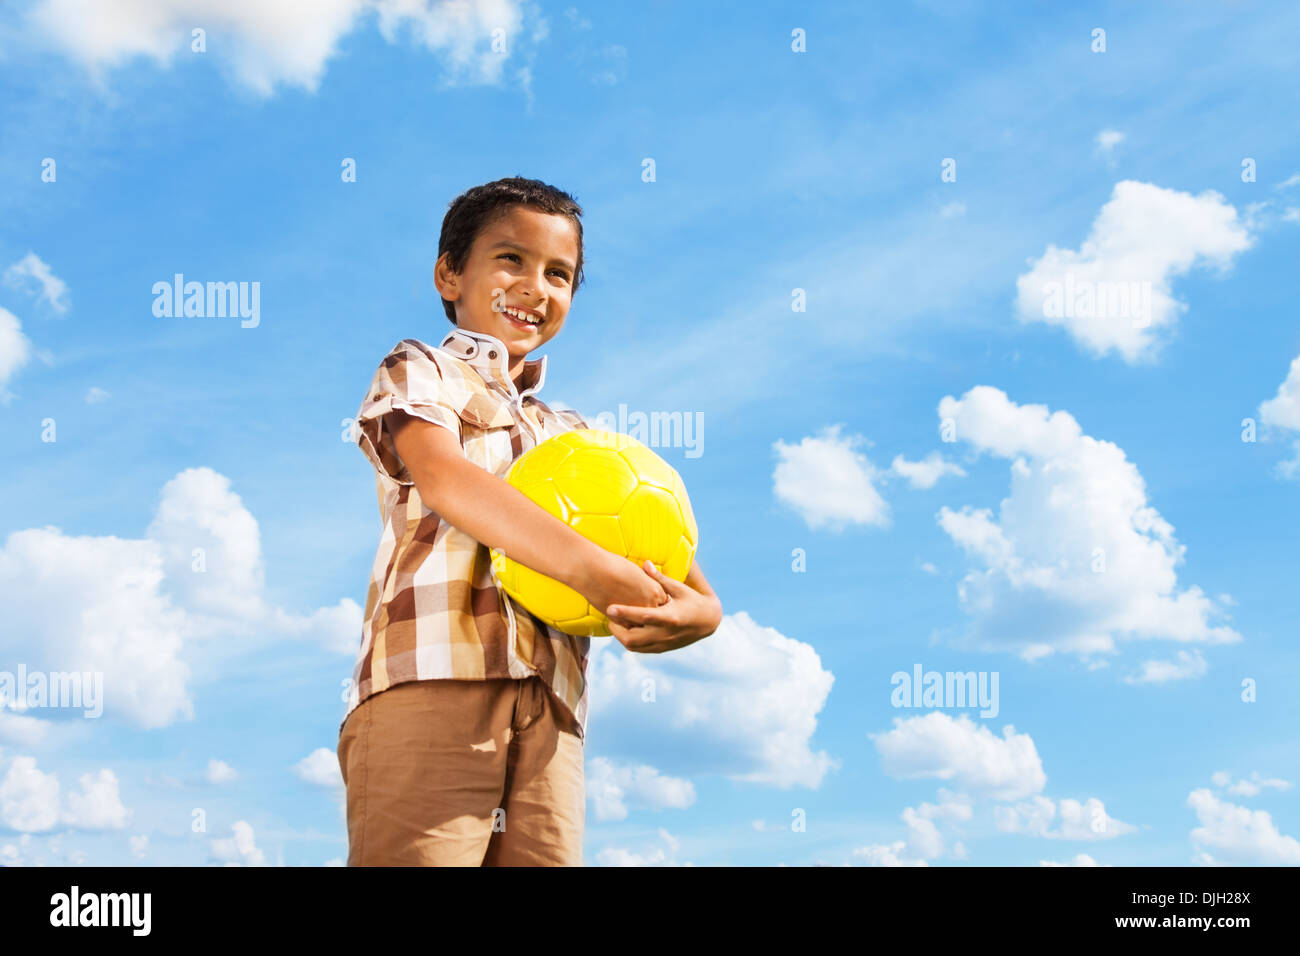 Cute little boy standing with football ball in hands over blue sky Stock Photo